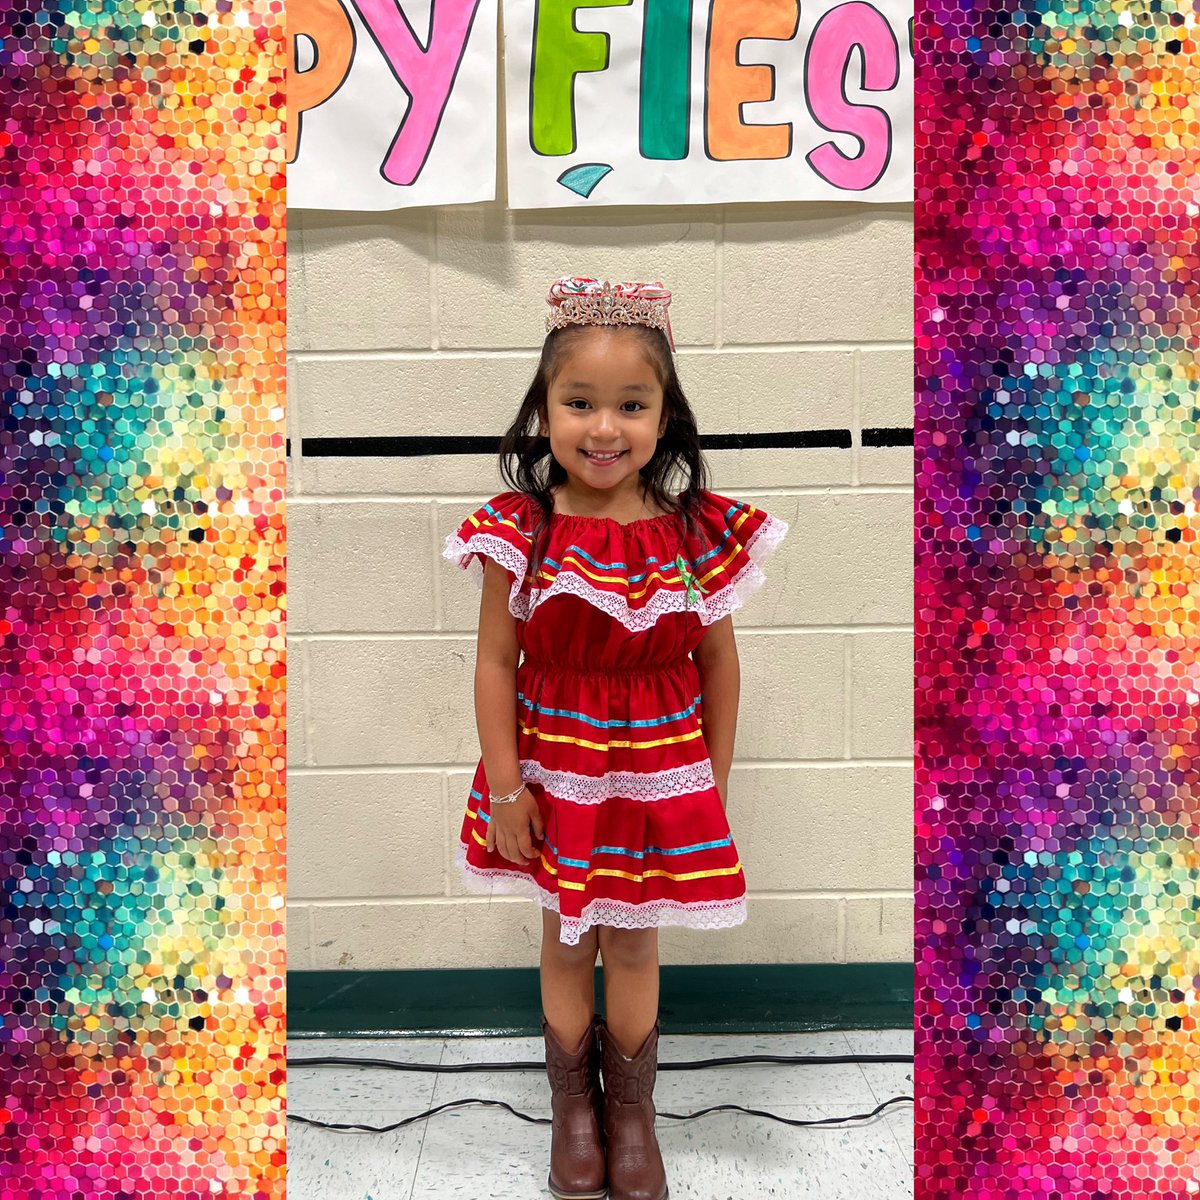 Let’s give a shout out to our HPE FIESTA QUEEN 2023! We love you Melina!!! ❤️🎉🤍 #vivafiesta @the_real_adam2